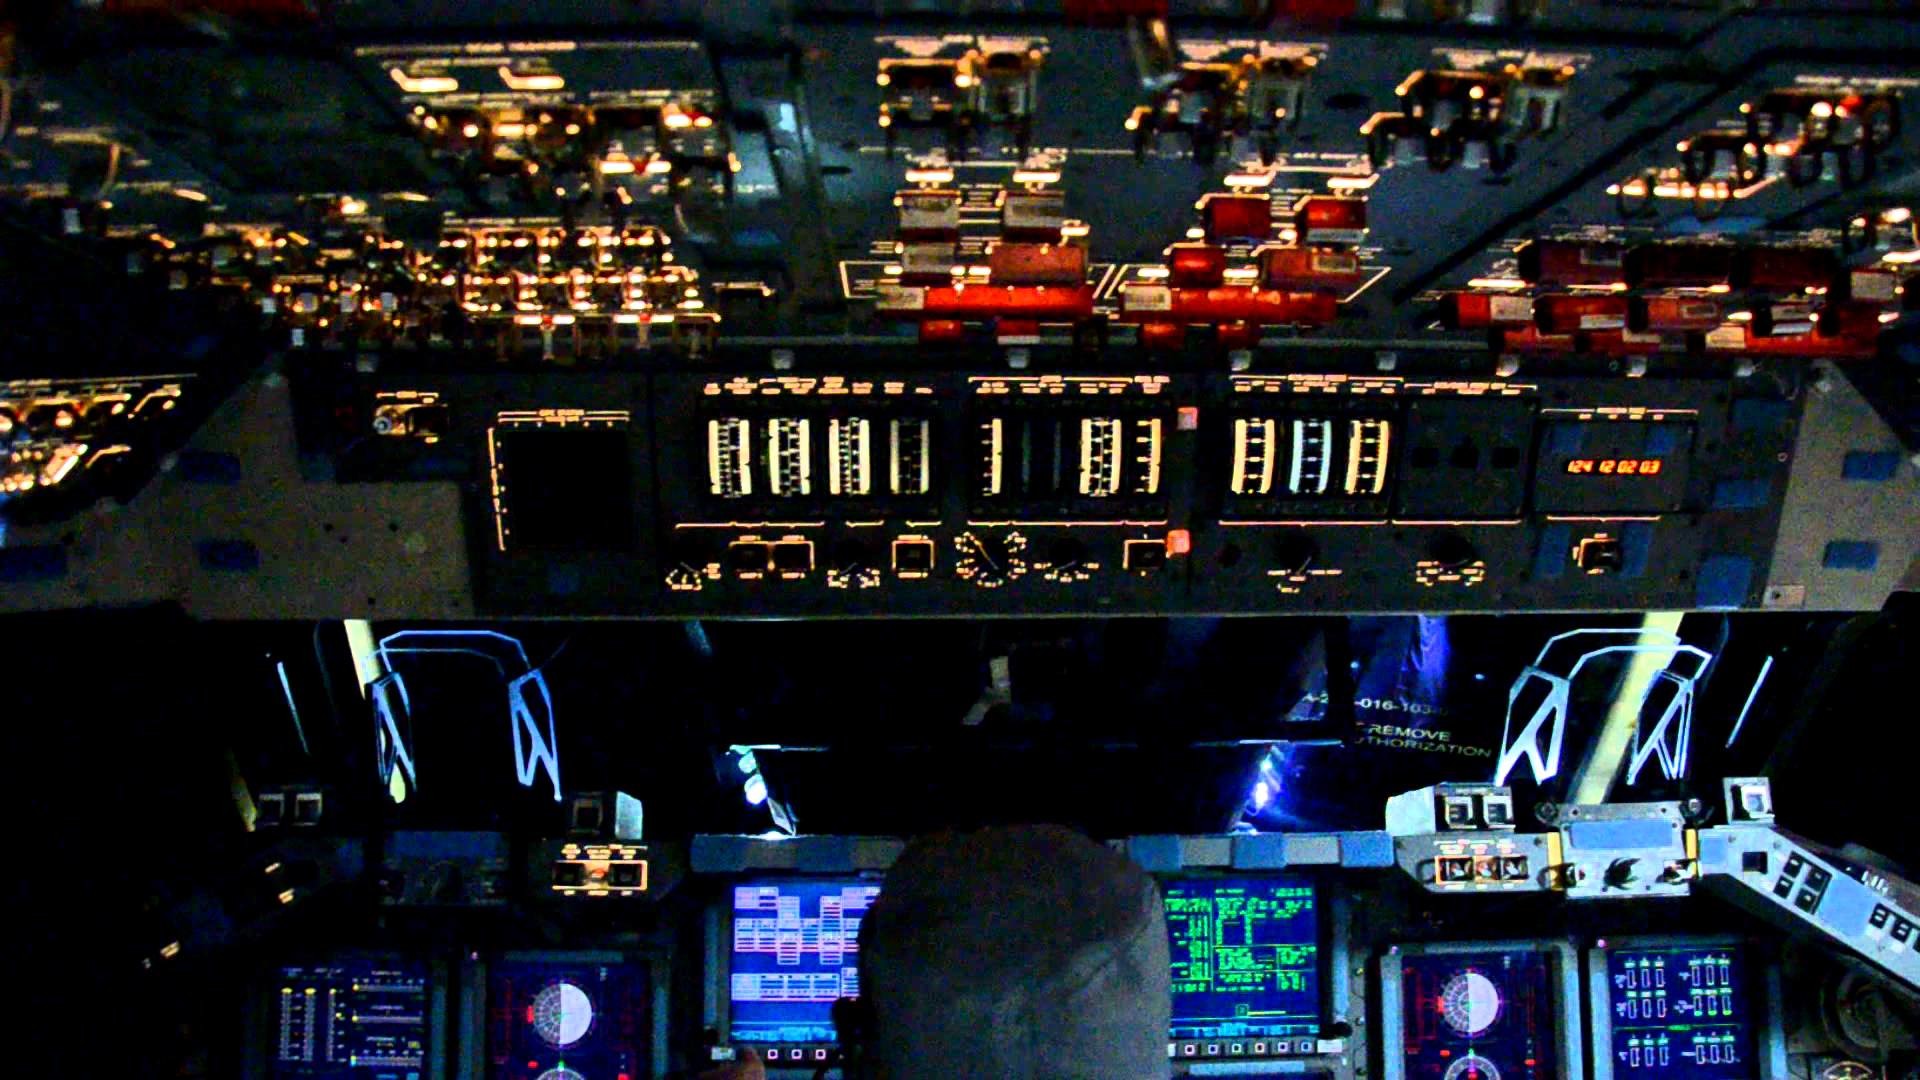 1920x1080 Displaying 17> Images For - Space Shuttle Cockpit Wallpaper.